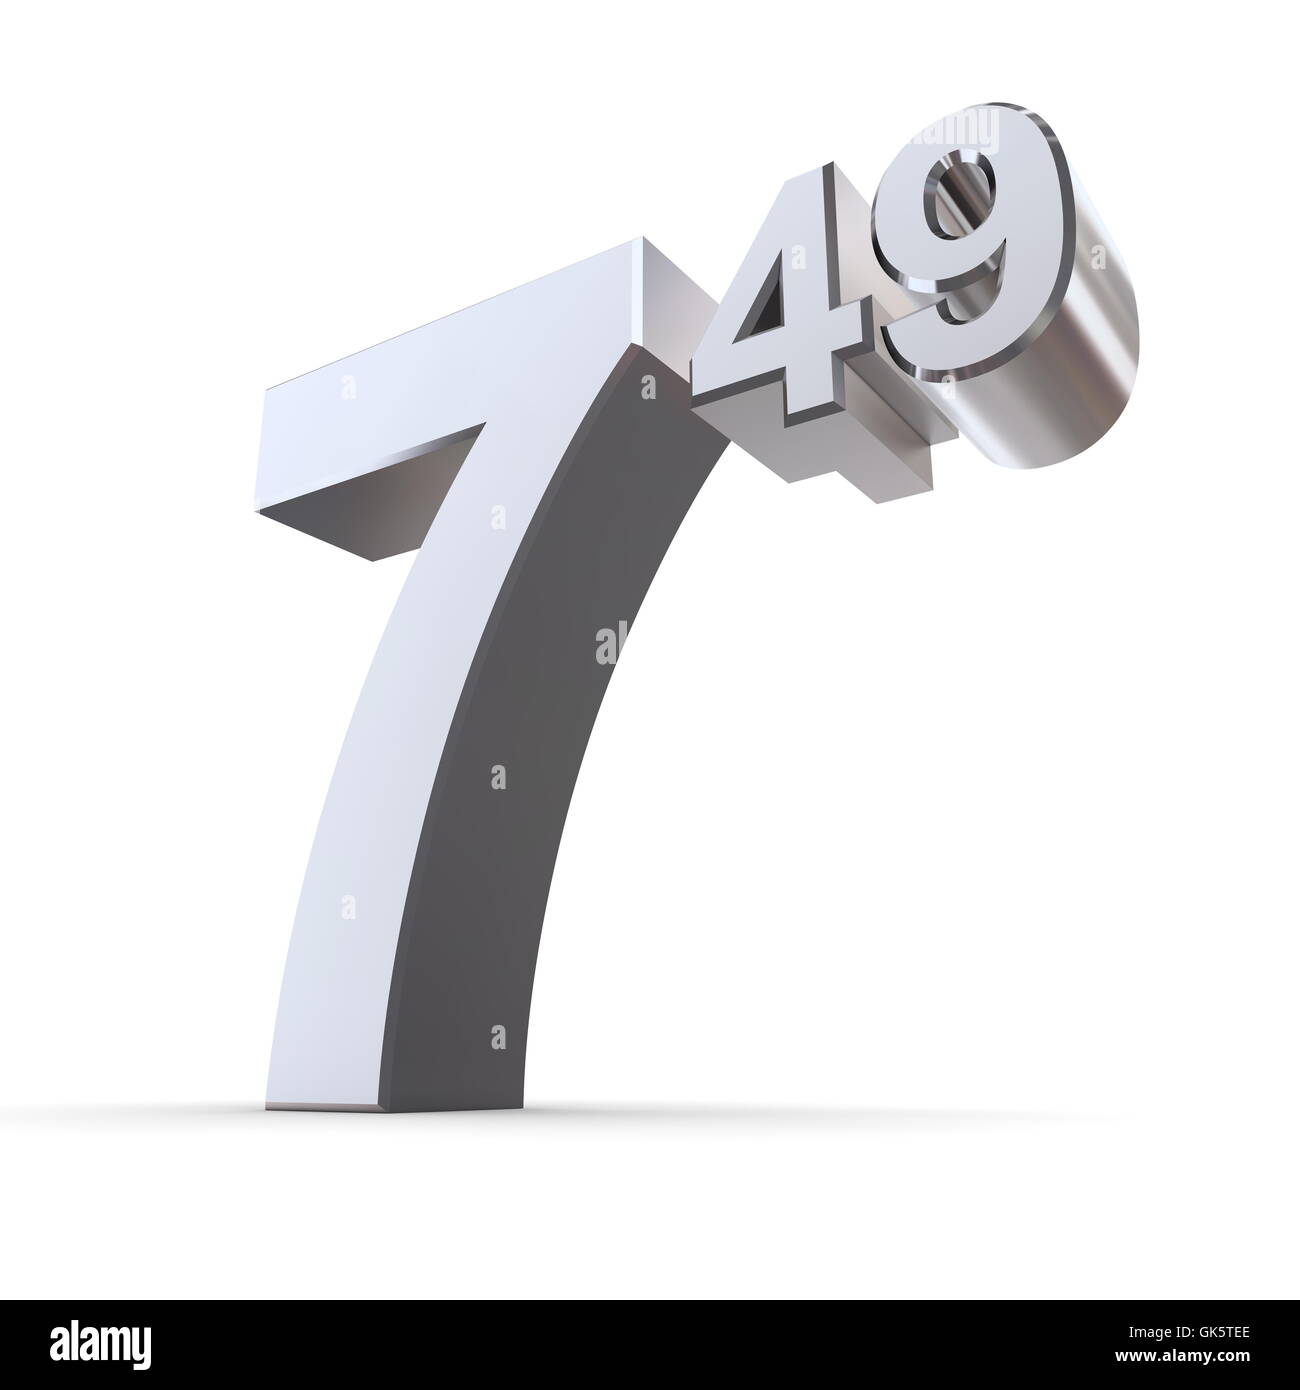 Solid Price Tag Number 7.49 - Shiny Silver-Chrome Stock Photo